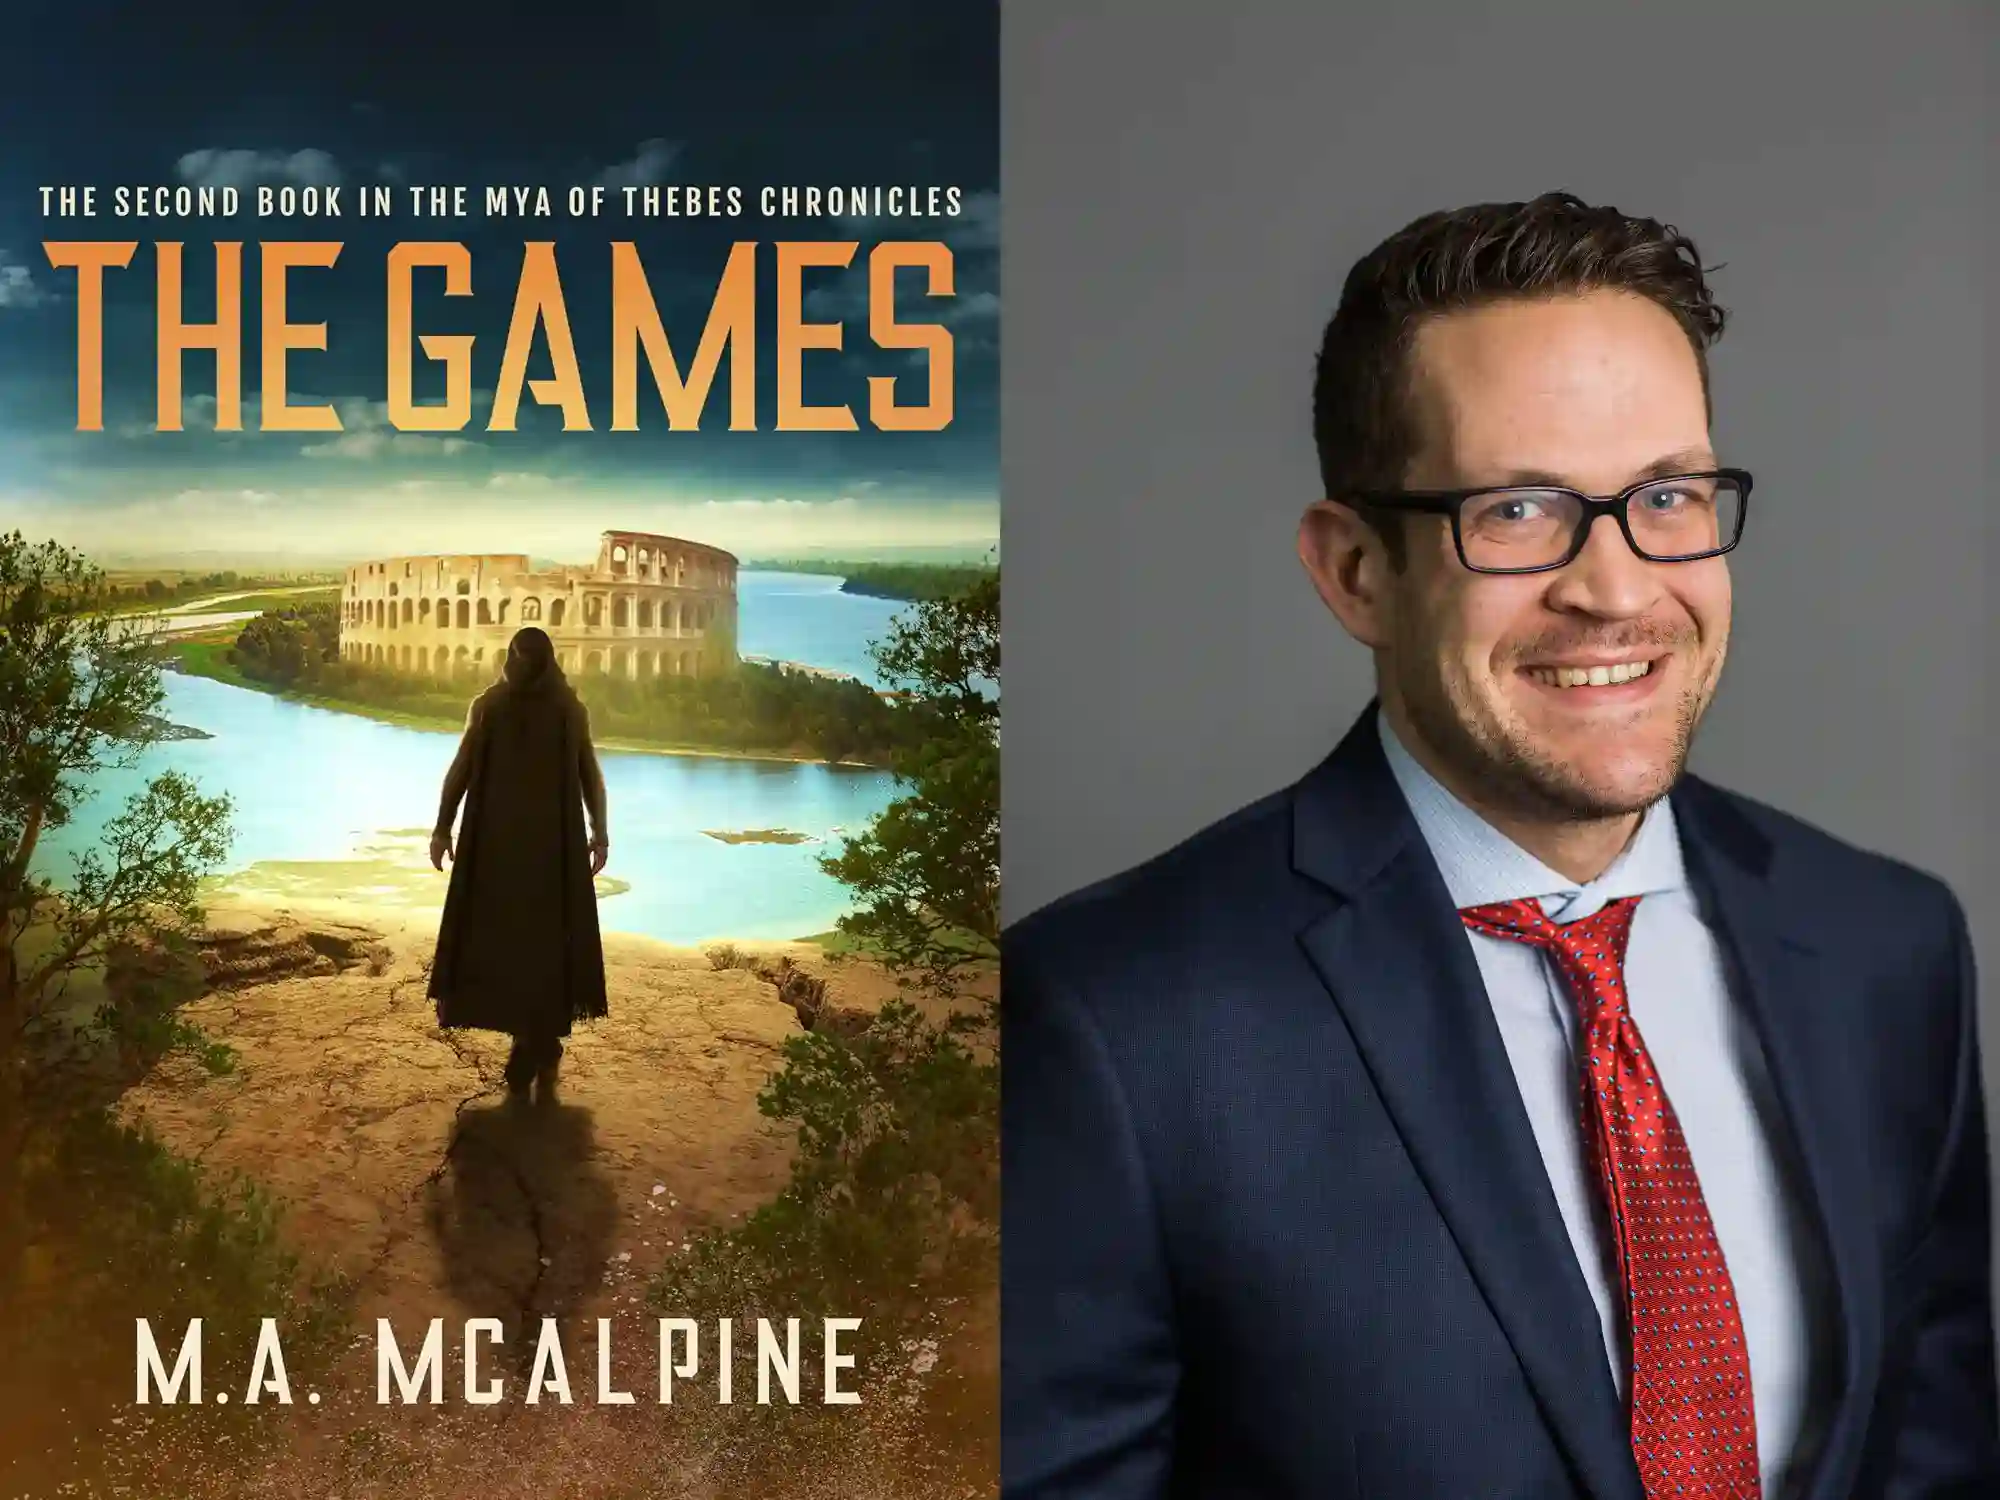 m_a_mcalpine_the_games_author_interview